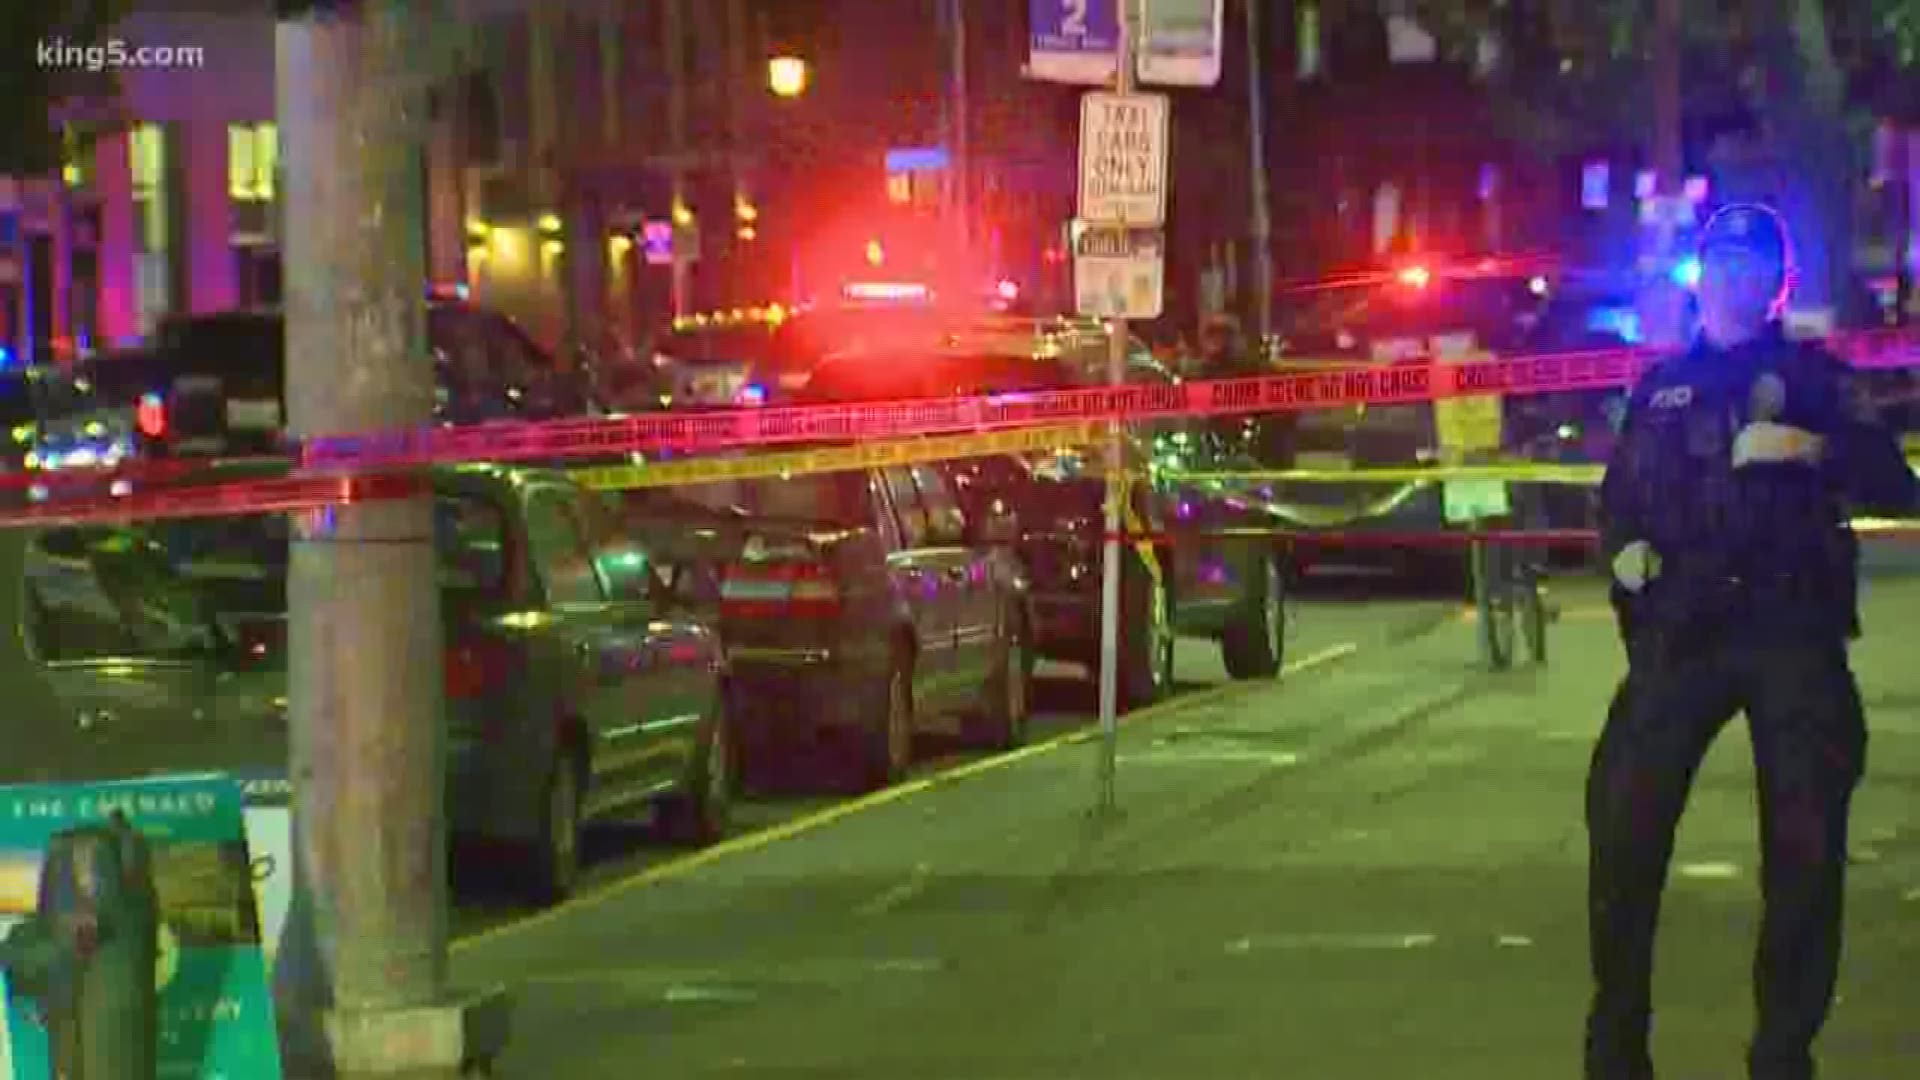 A man was shot and killed outside a bar early Sunday morning in Seattle's Belltown neighborhood.